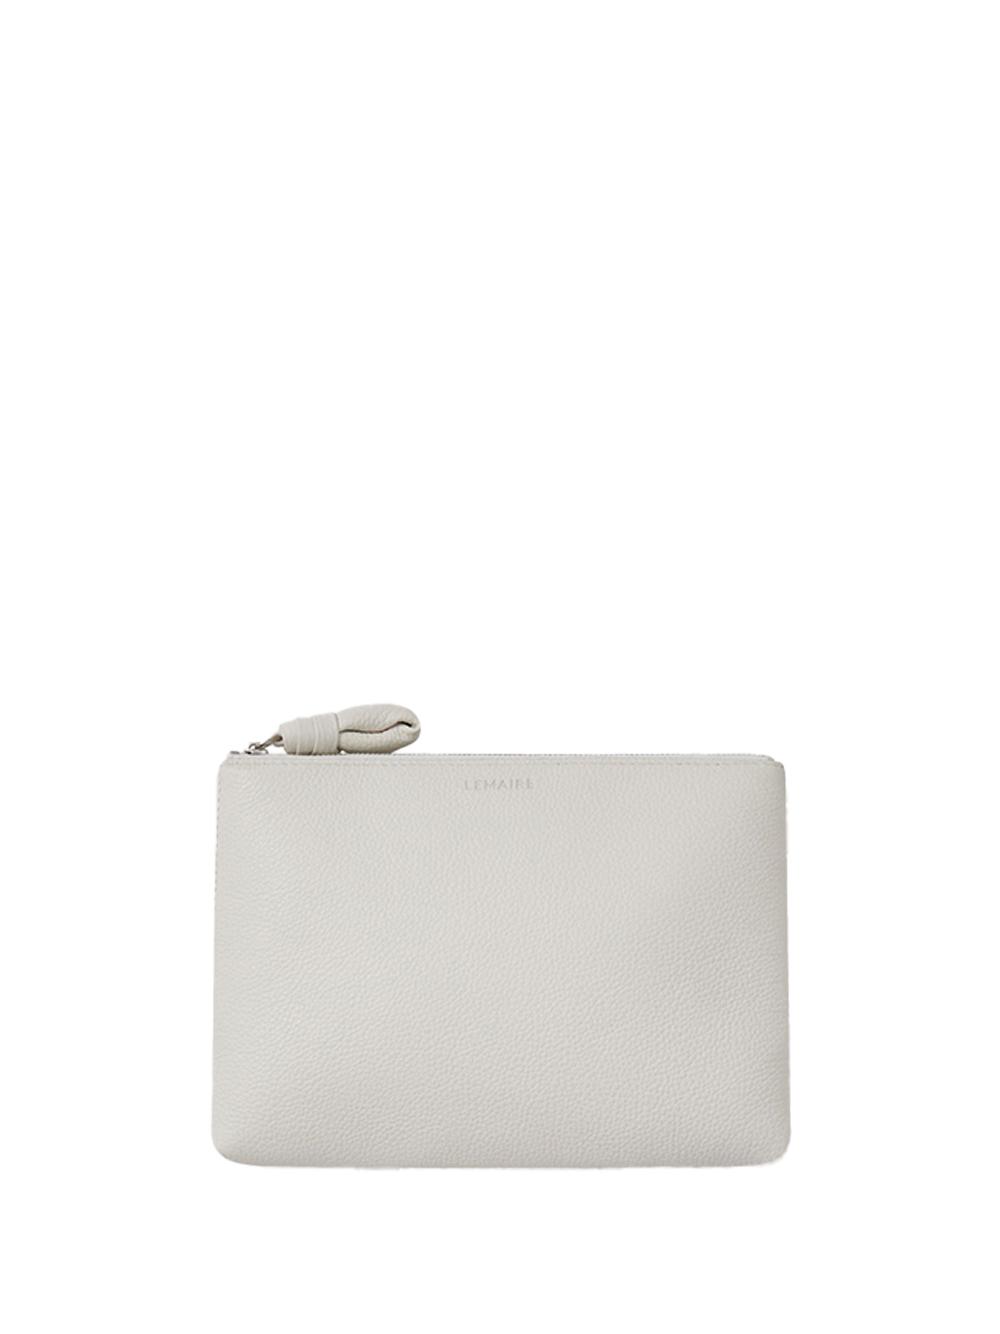 Lemaire Small Pouch Challk In Leather in White | Lyst